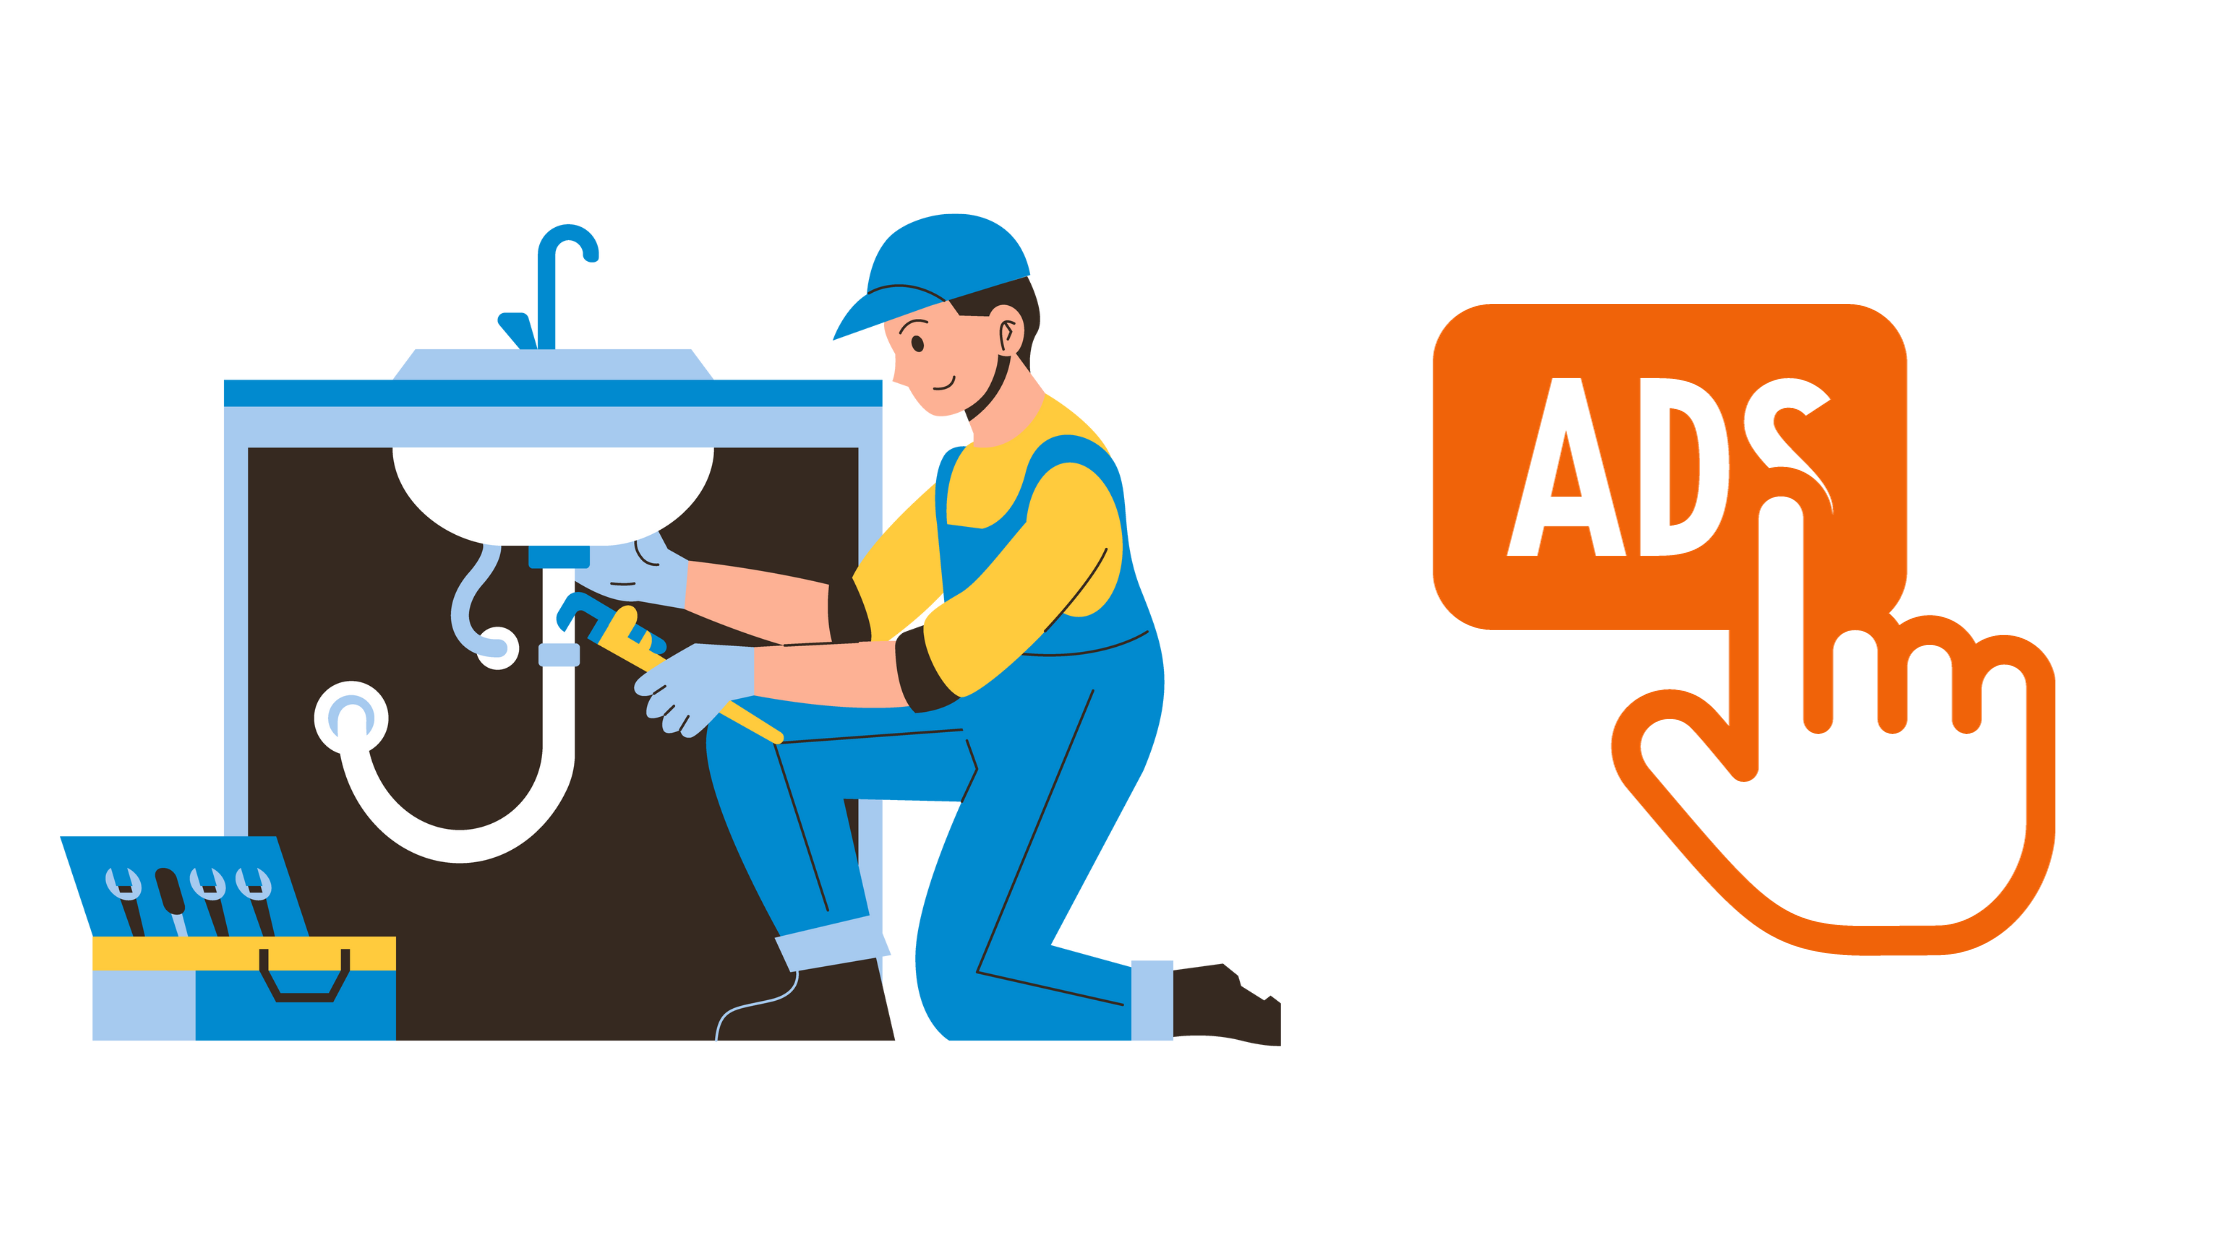 Google ads for plumbers